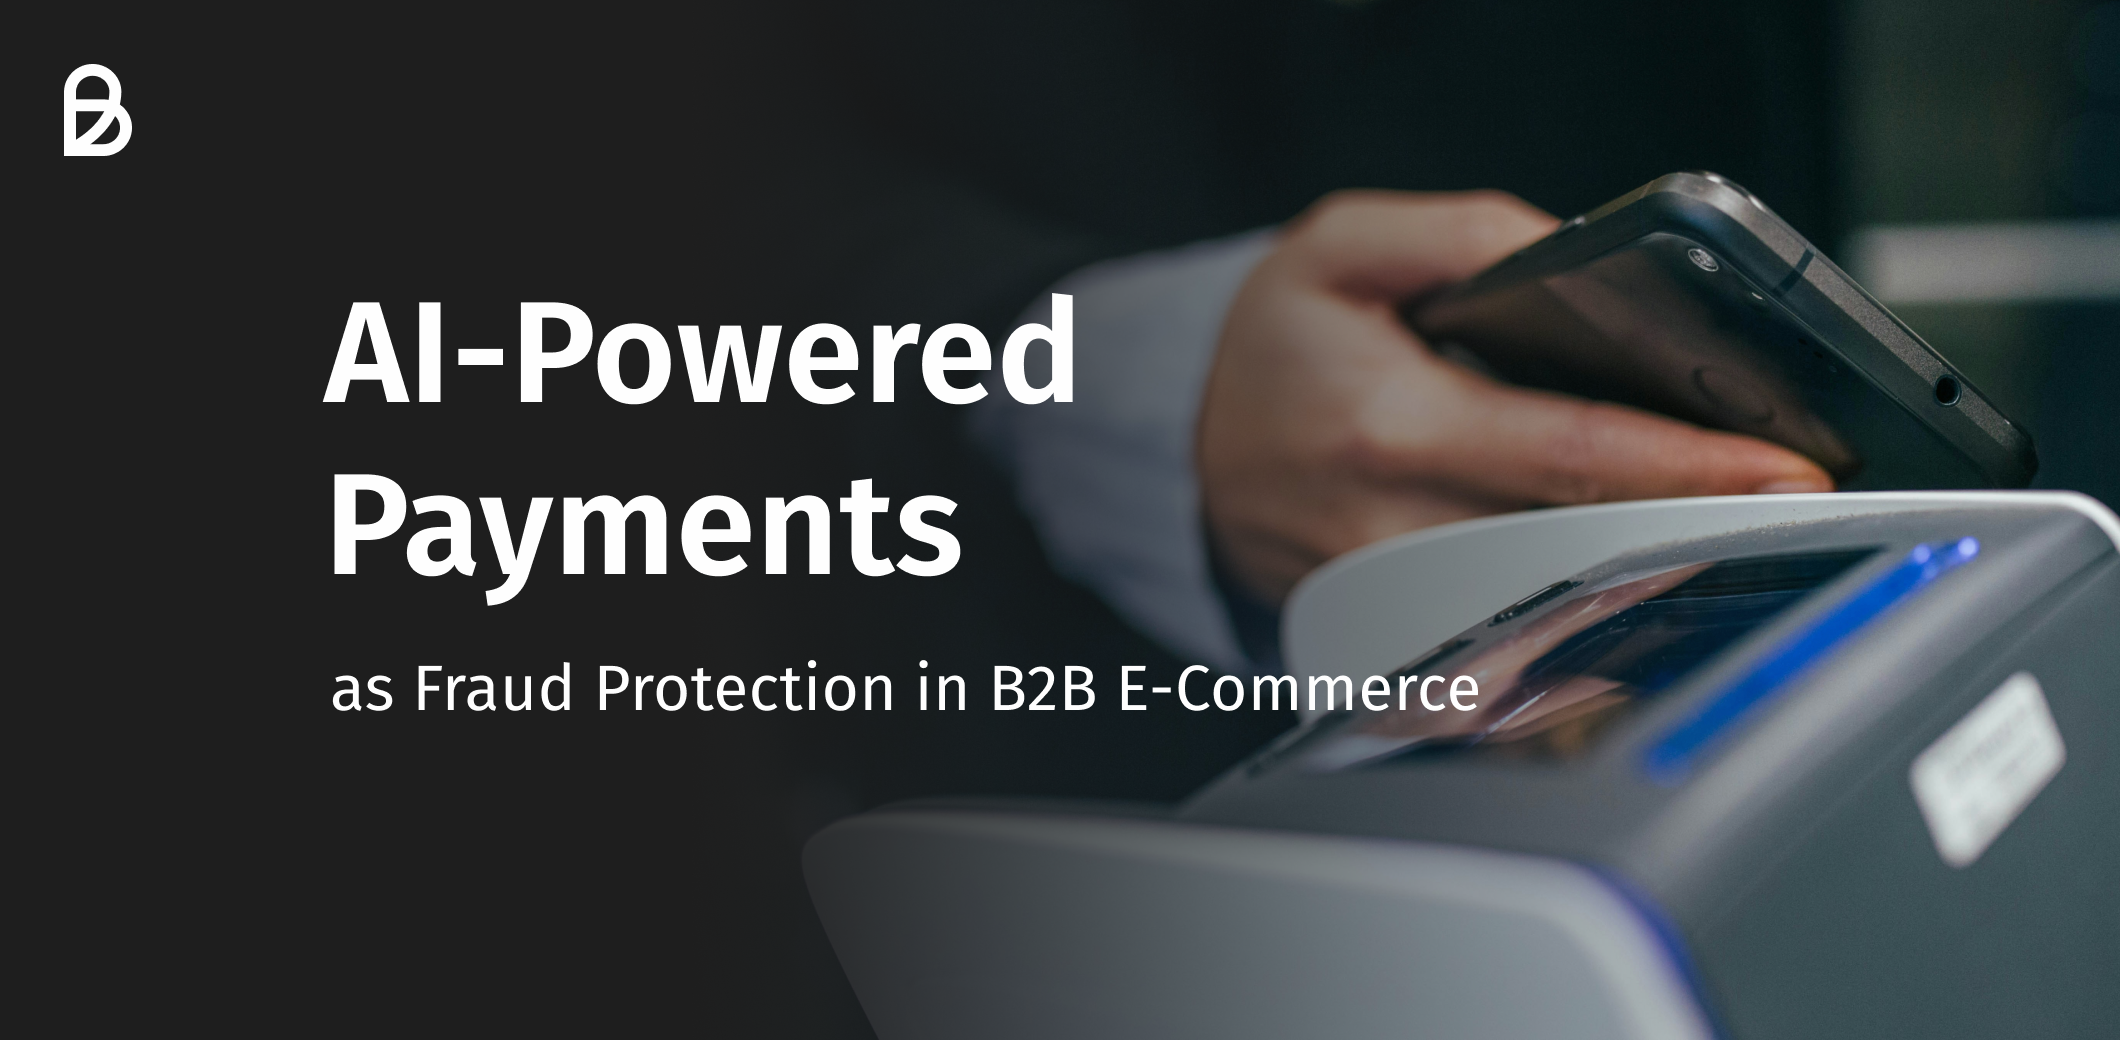 Blog AI-Powered Payments OPT2 (1)